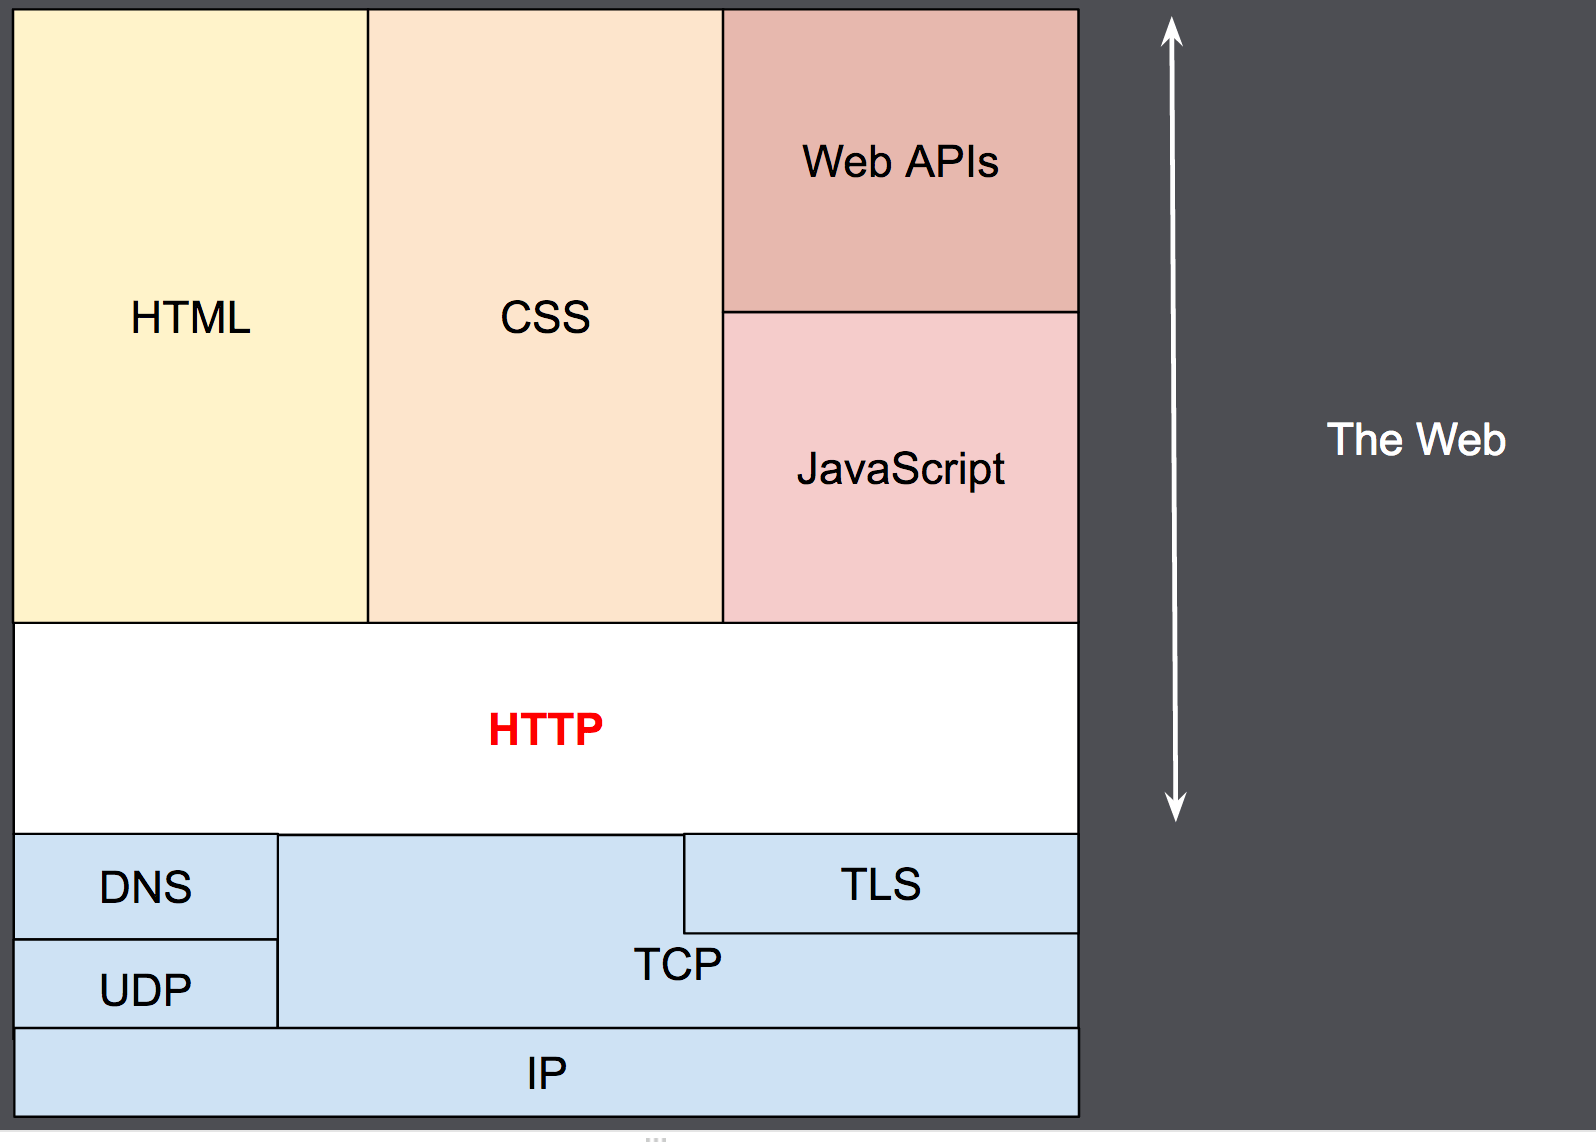 HTTP as an application layer protocol, on top of TCP (transport layer) and IP (network layer) and below the presentation layer.